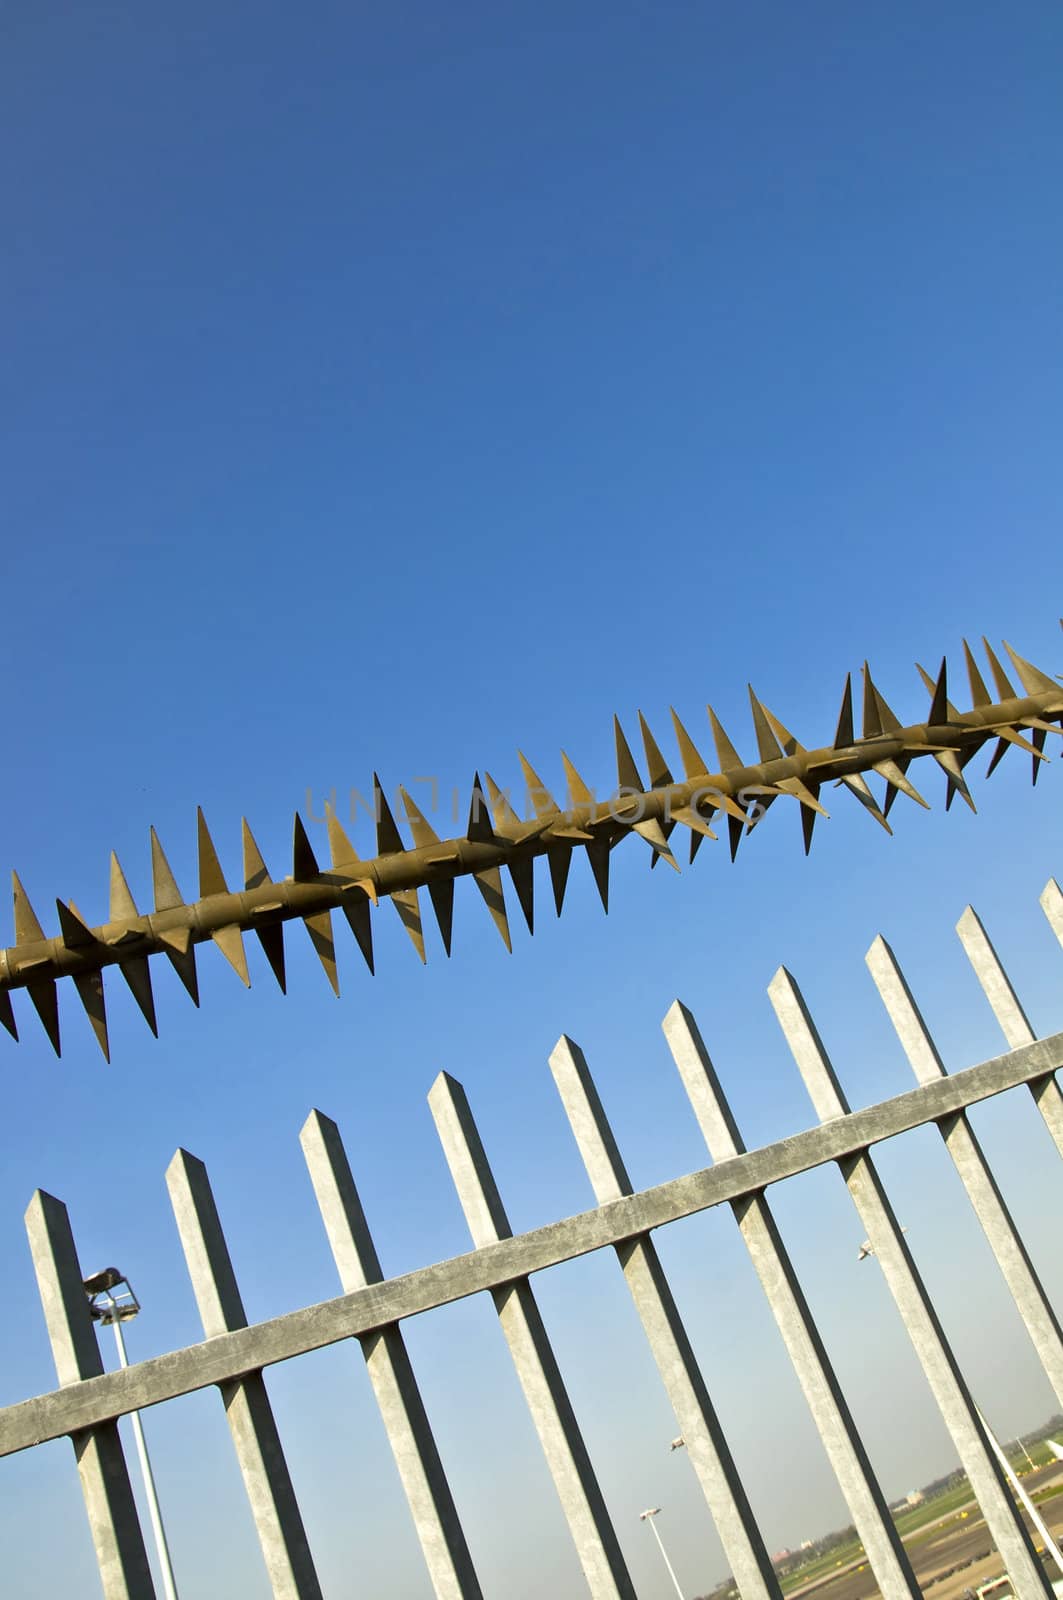 Barbed wire fence at the blue sky. metaphor of freedom and incarceration